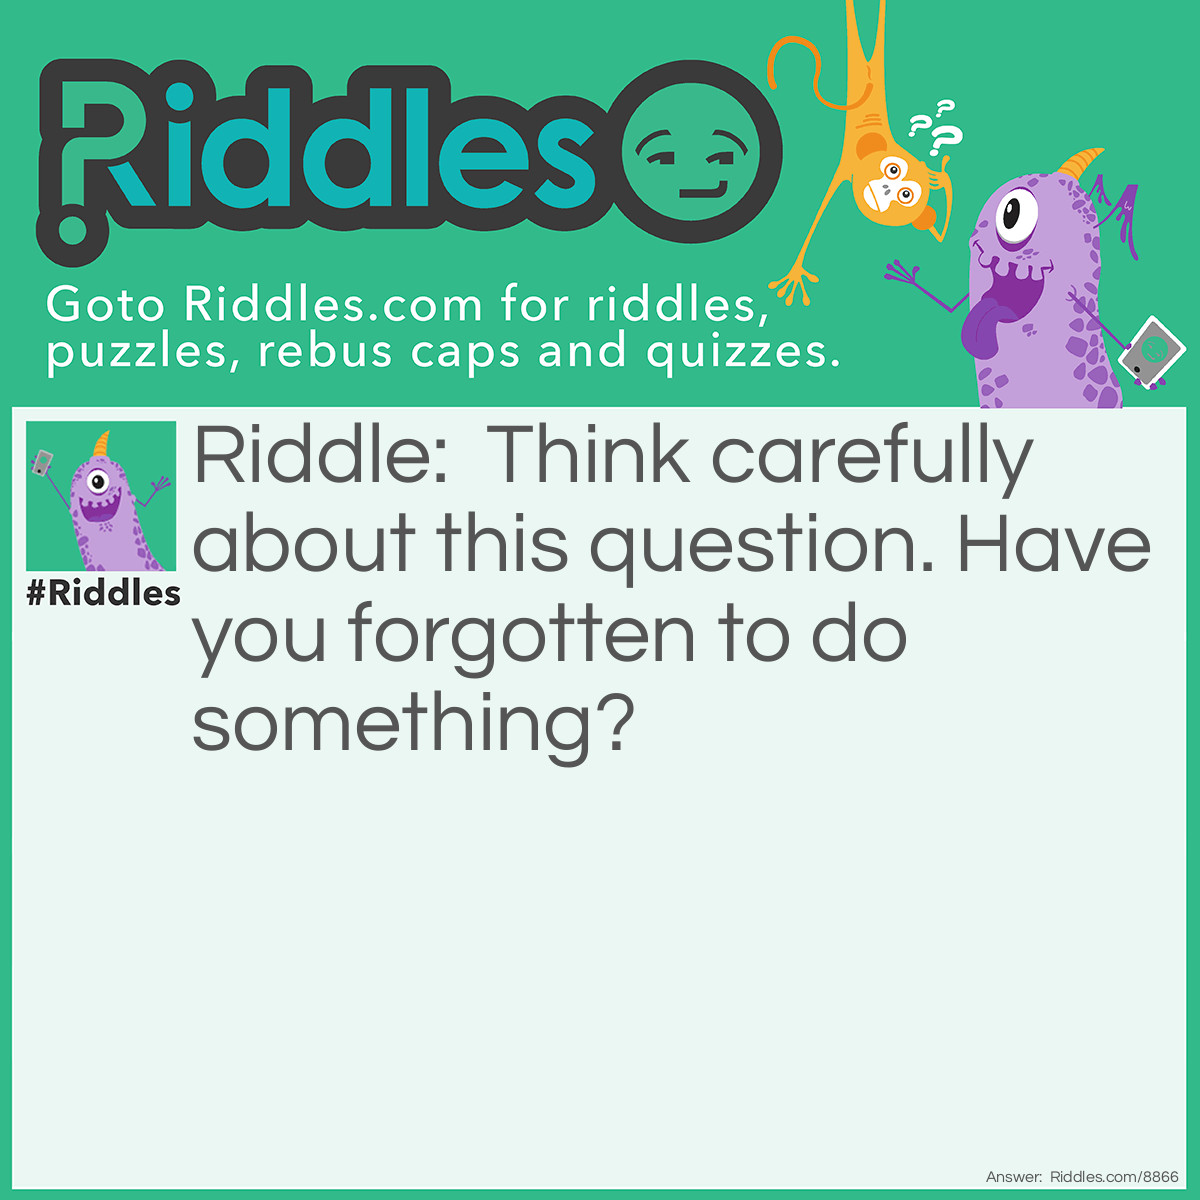 Riddle: Think carefully about this question. Have you forgotten to do something? Answer: You're welcome.